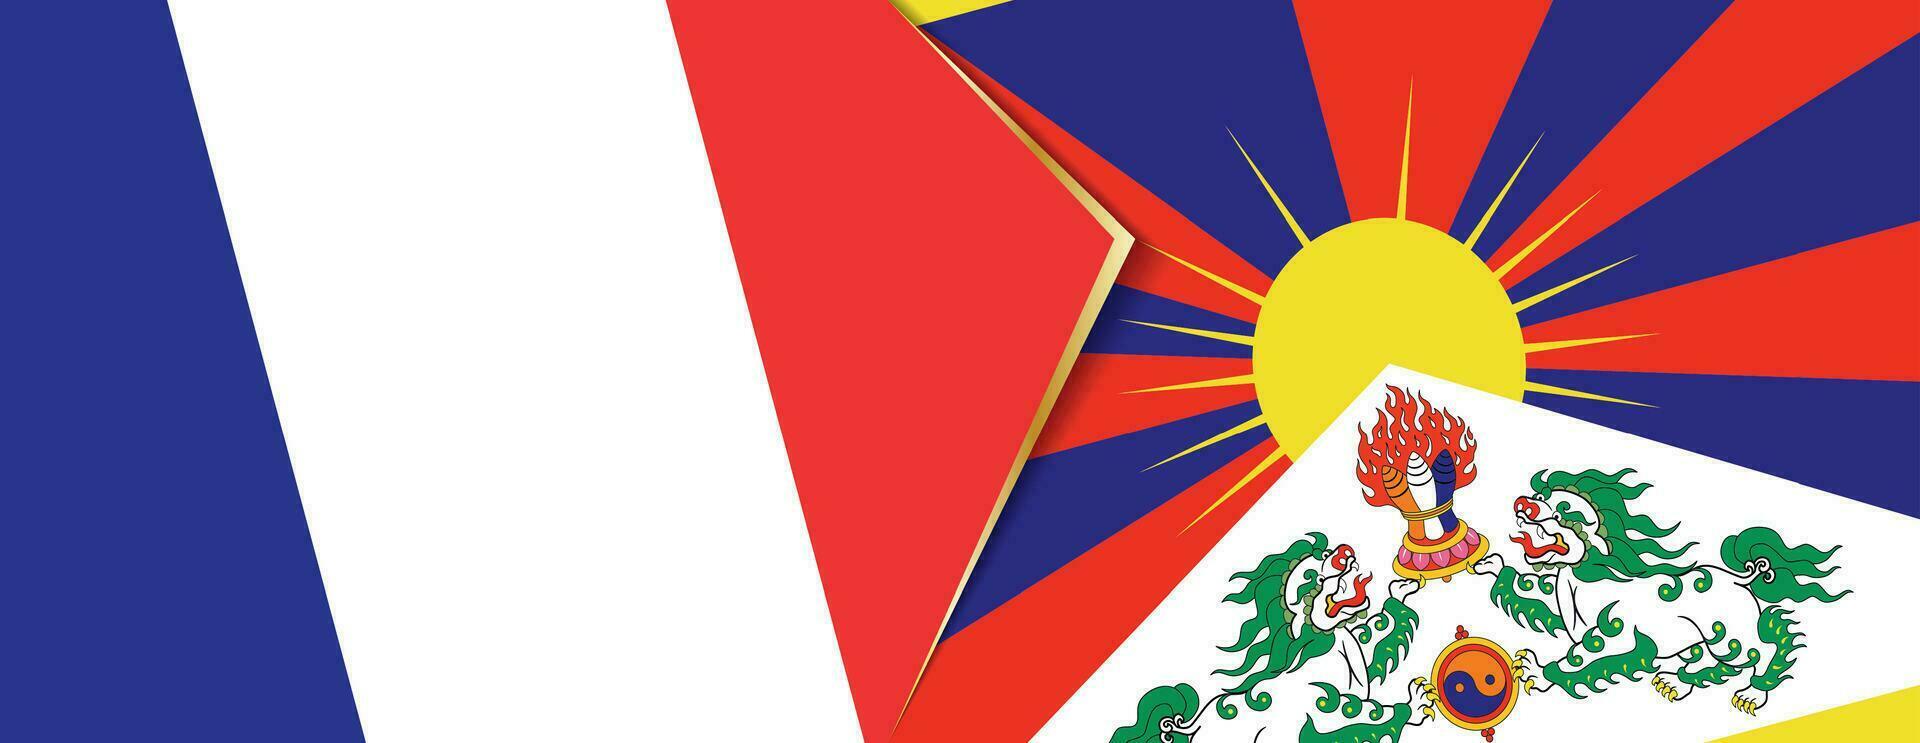 France and Tibet flags, two vector flags.